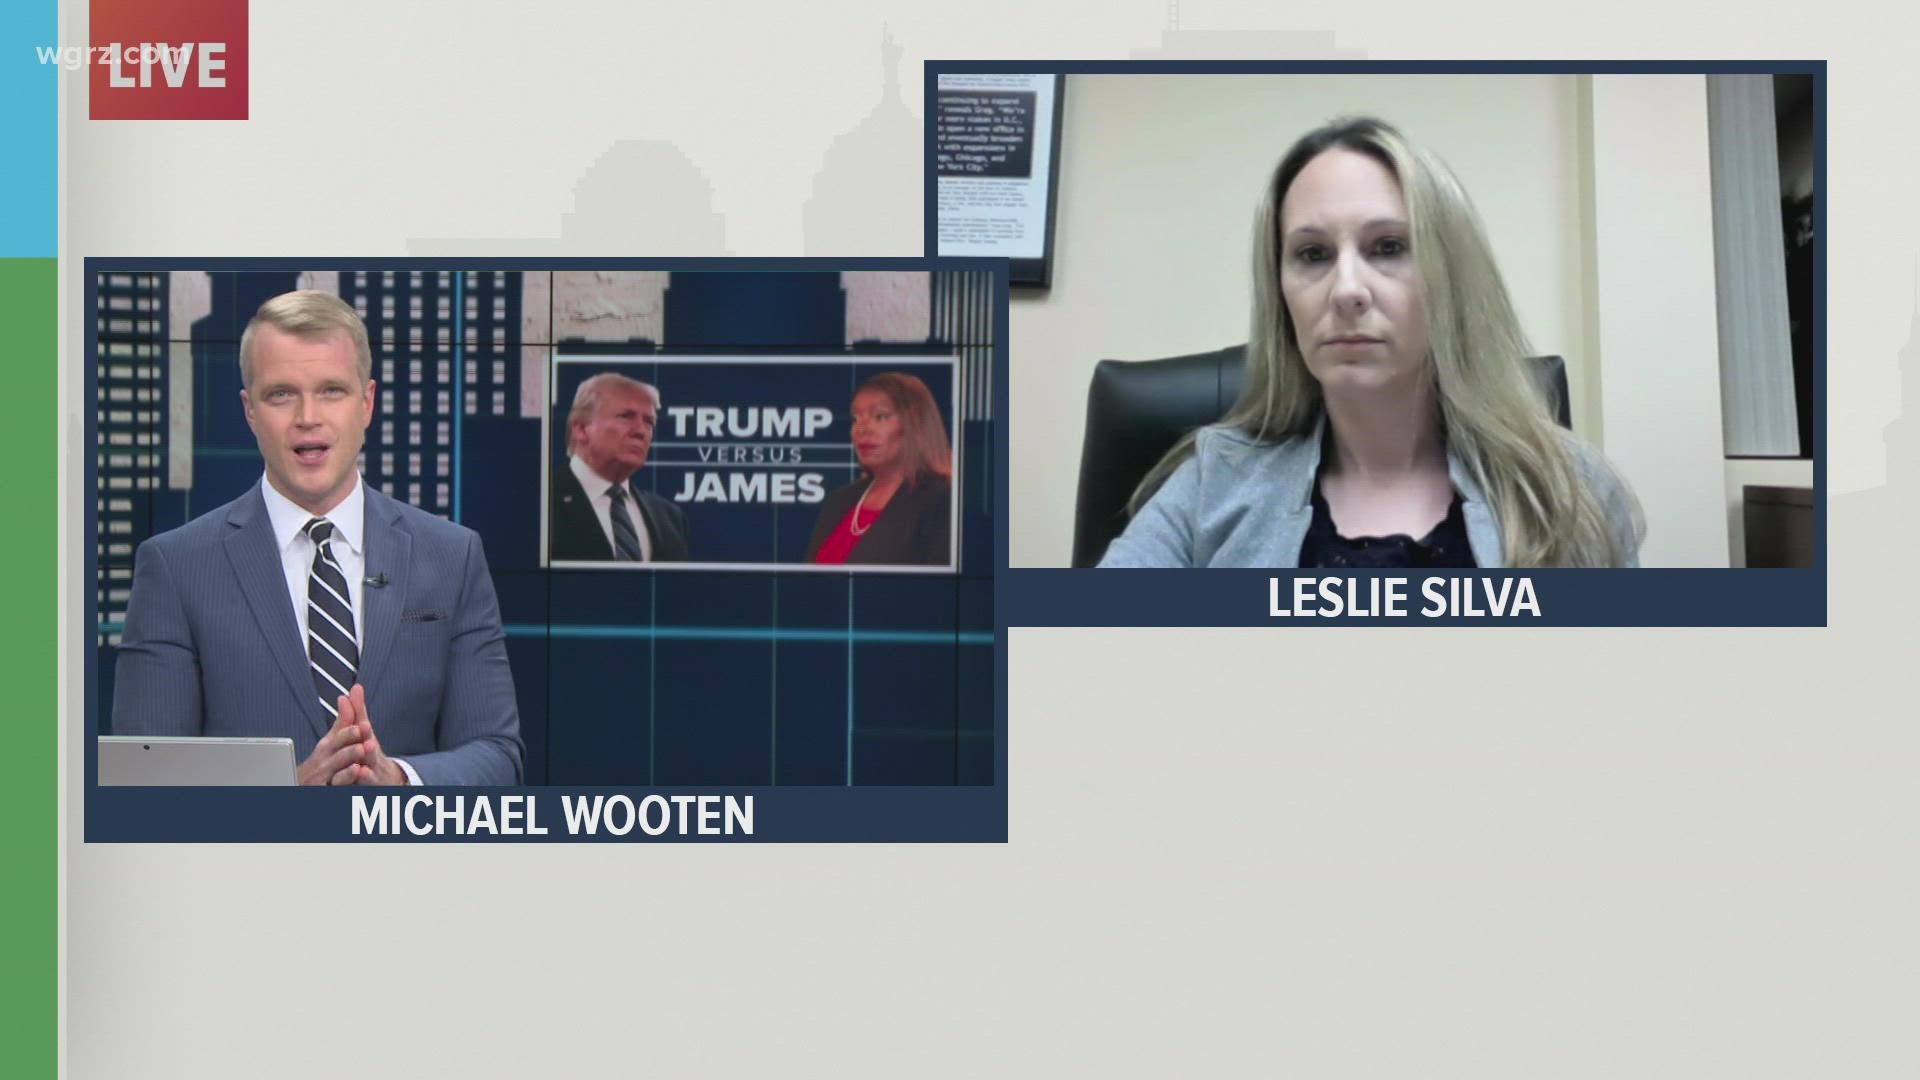 Leslie Silva joined the 2 On Your Side Town Hall to discuss Attorney General Letitia James and her civil investigation into former president Donald Trump.